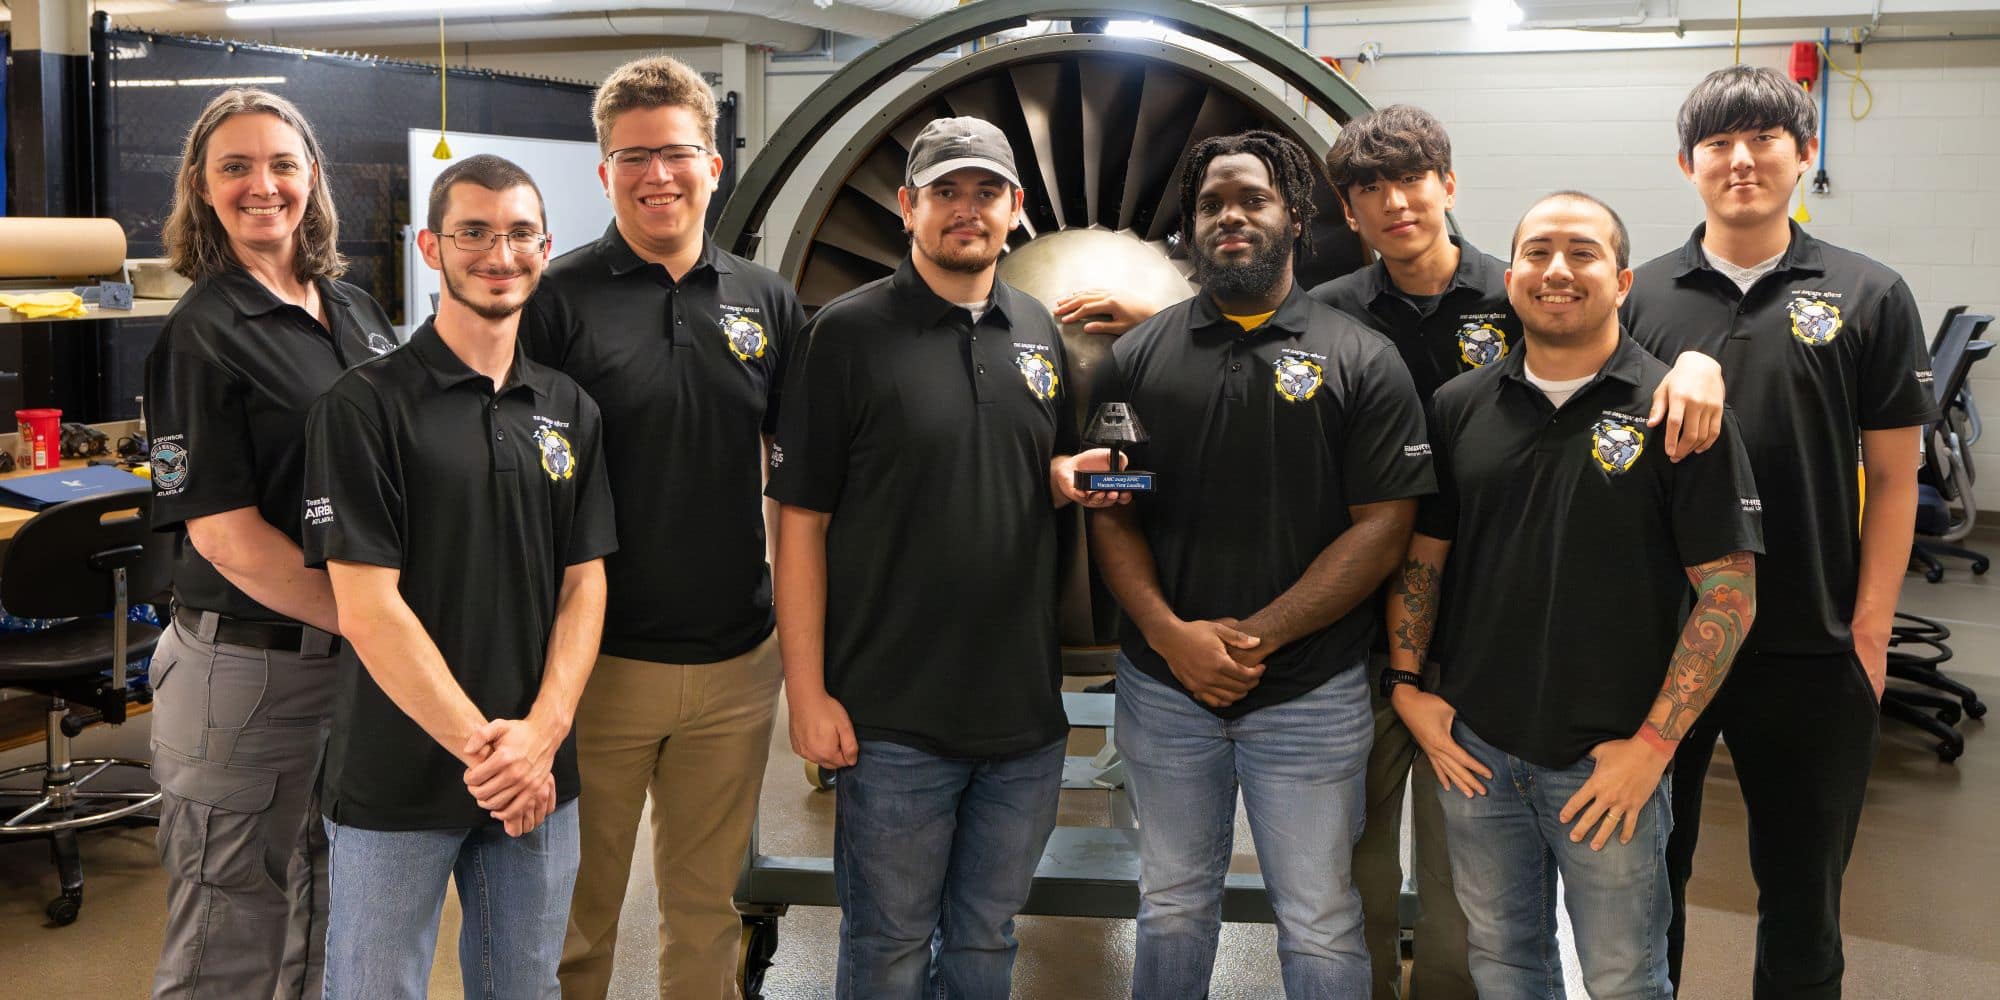 Philip Kwiecinski (third from left) and the Smokin’ Rivets AMS team that competed at the 2023 Aerospace Maintenance Competition. (Photo: Embry-Riddle / Bernard Wilchusky)